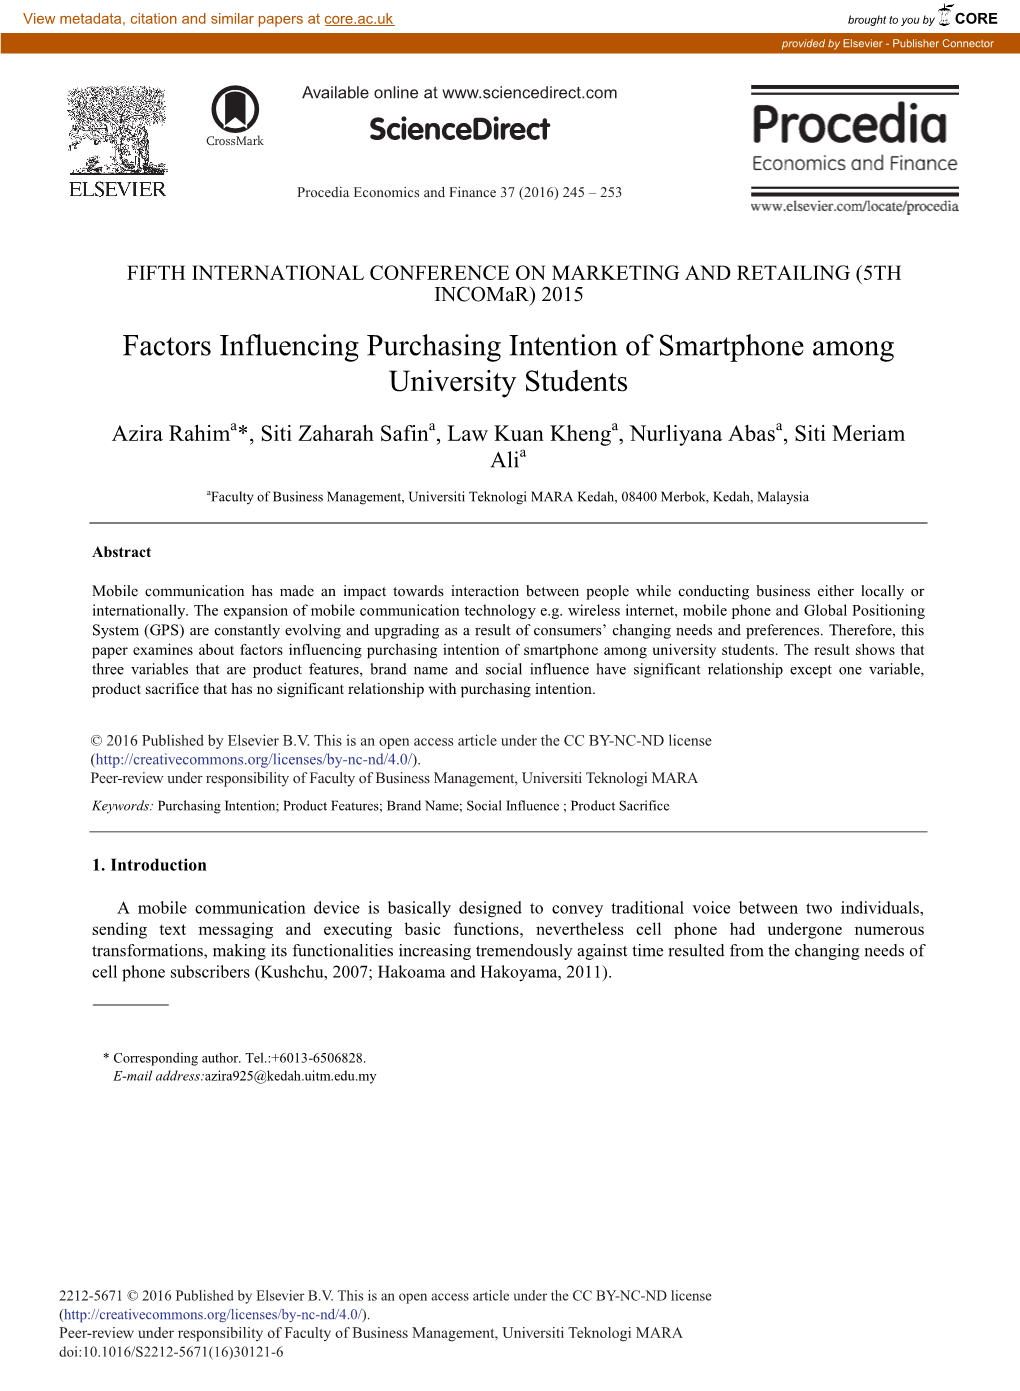 Factors Influencing Purchasing Intention of Smartphone Among University Students